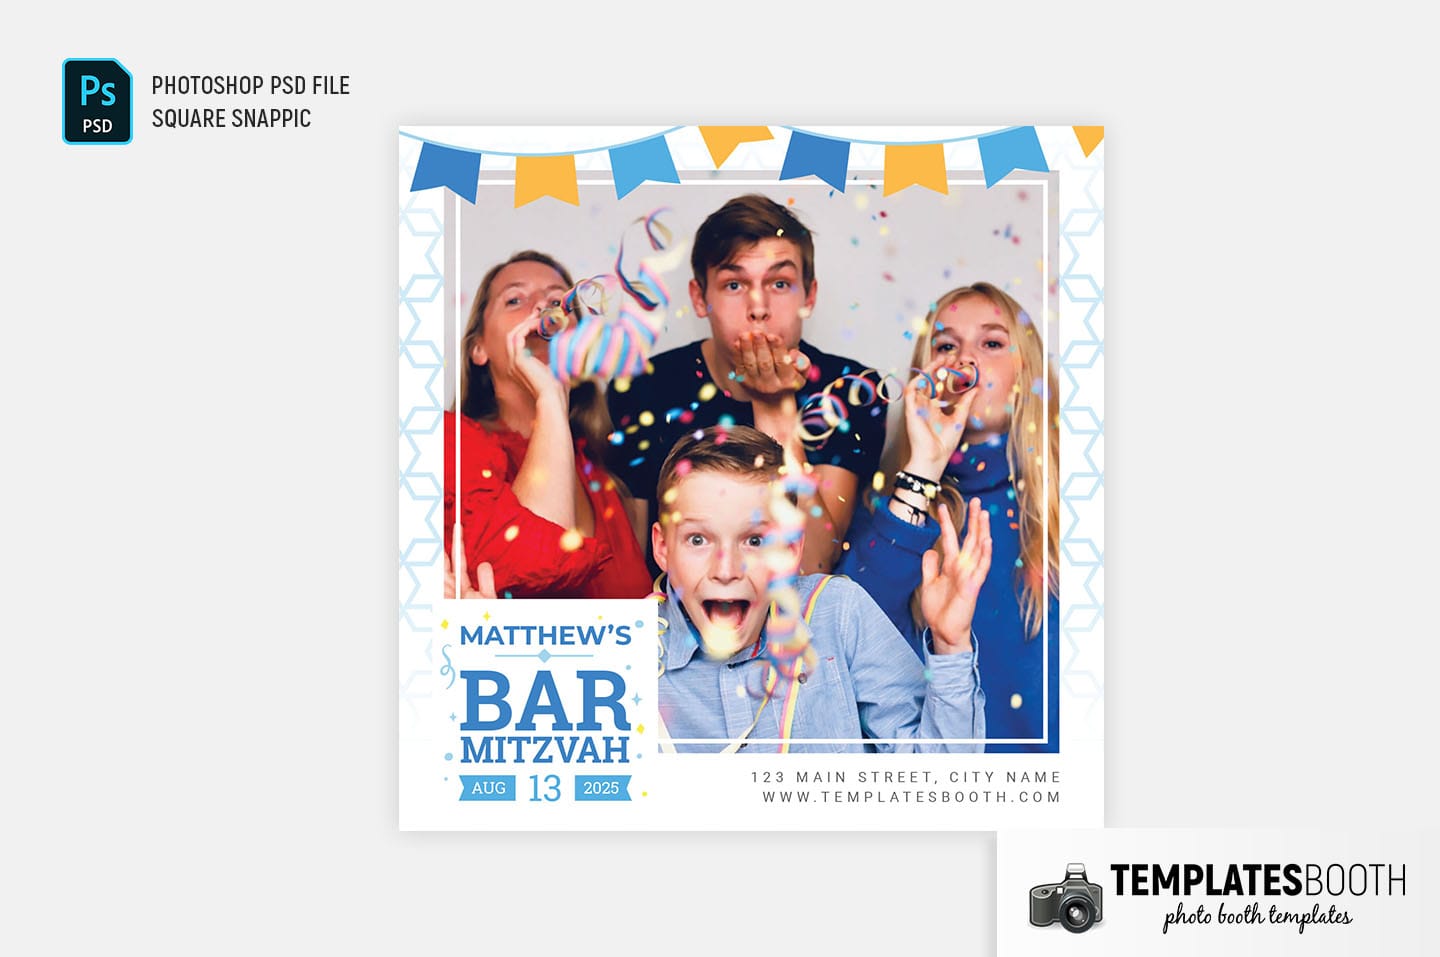 Bar Mitzvah Photo Booth Template (Snappic)